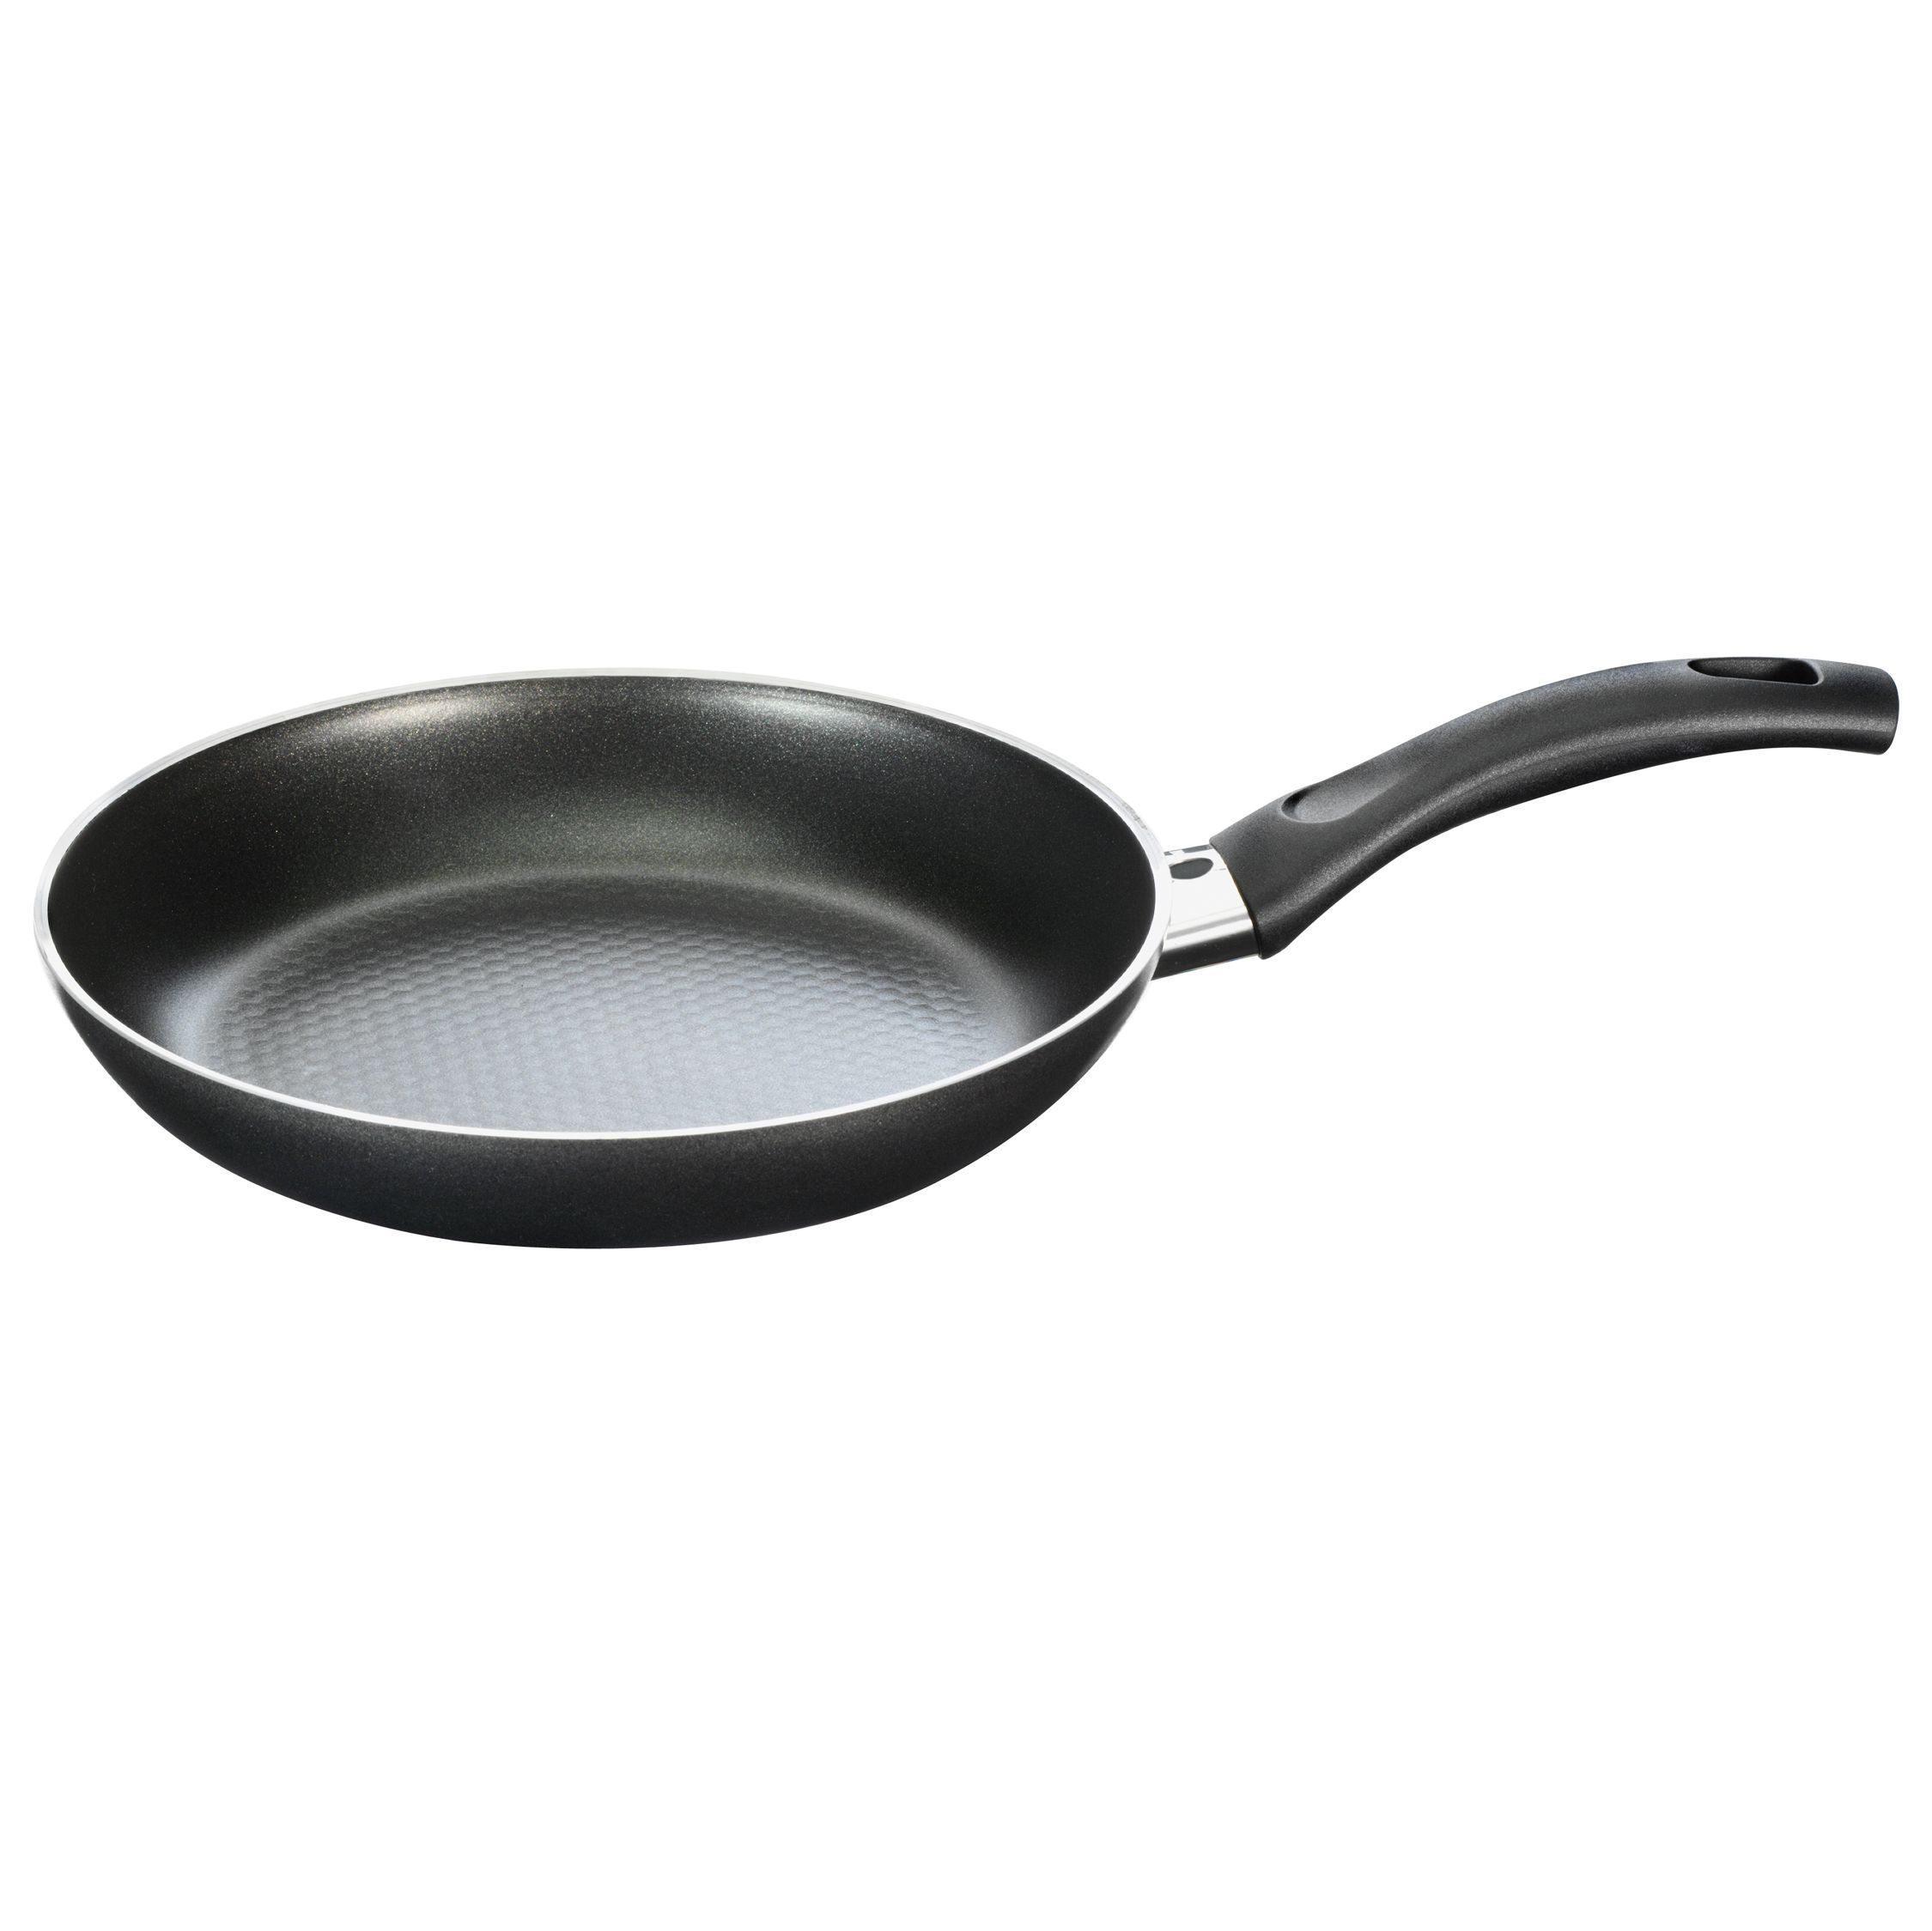 John Lewis Thermopoint Frying Pans